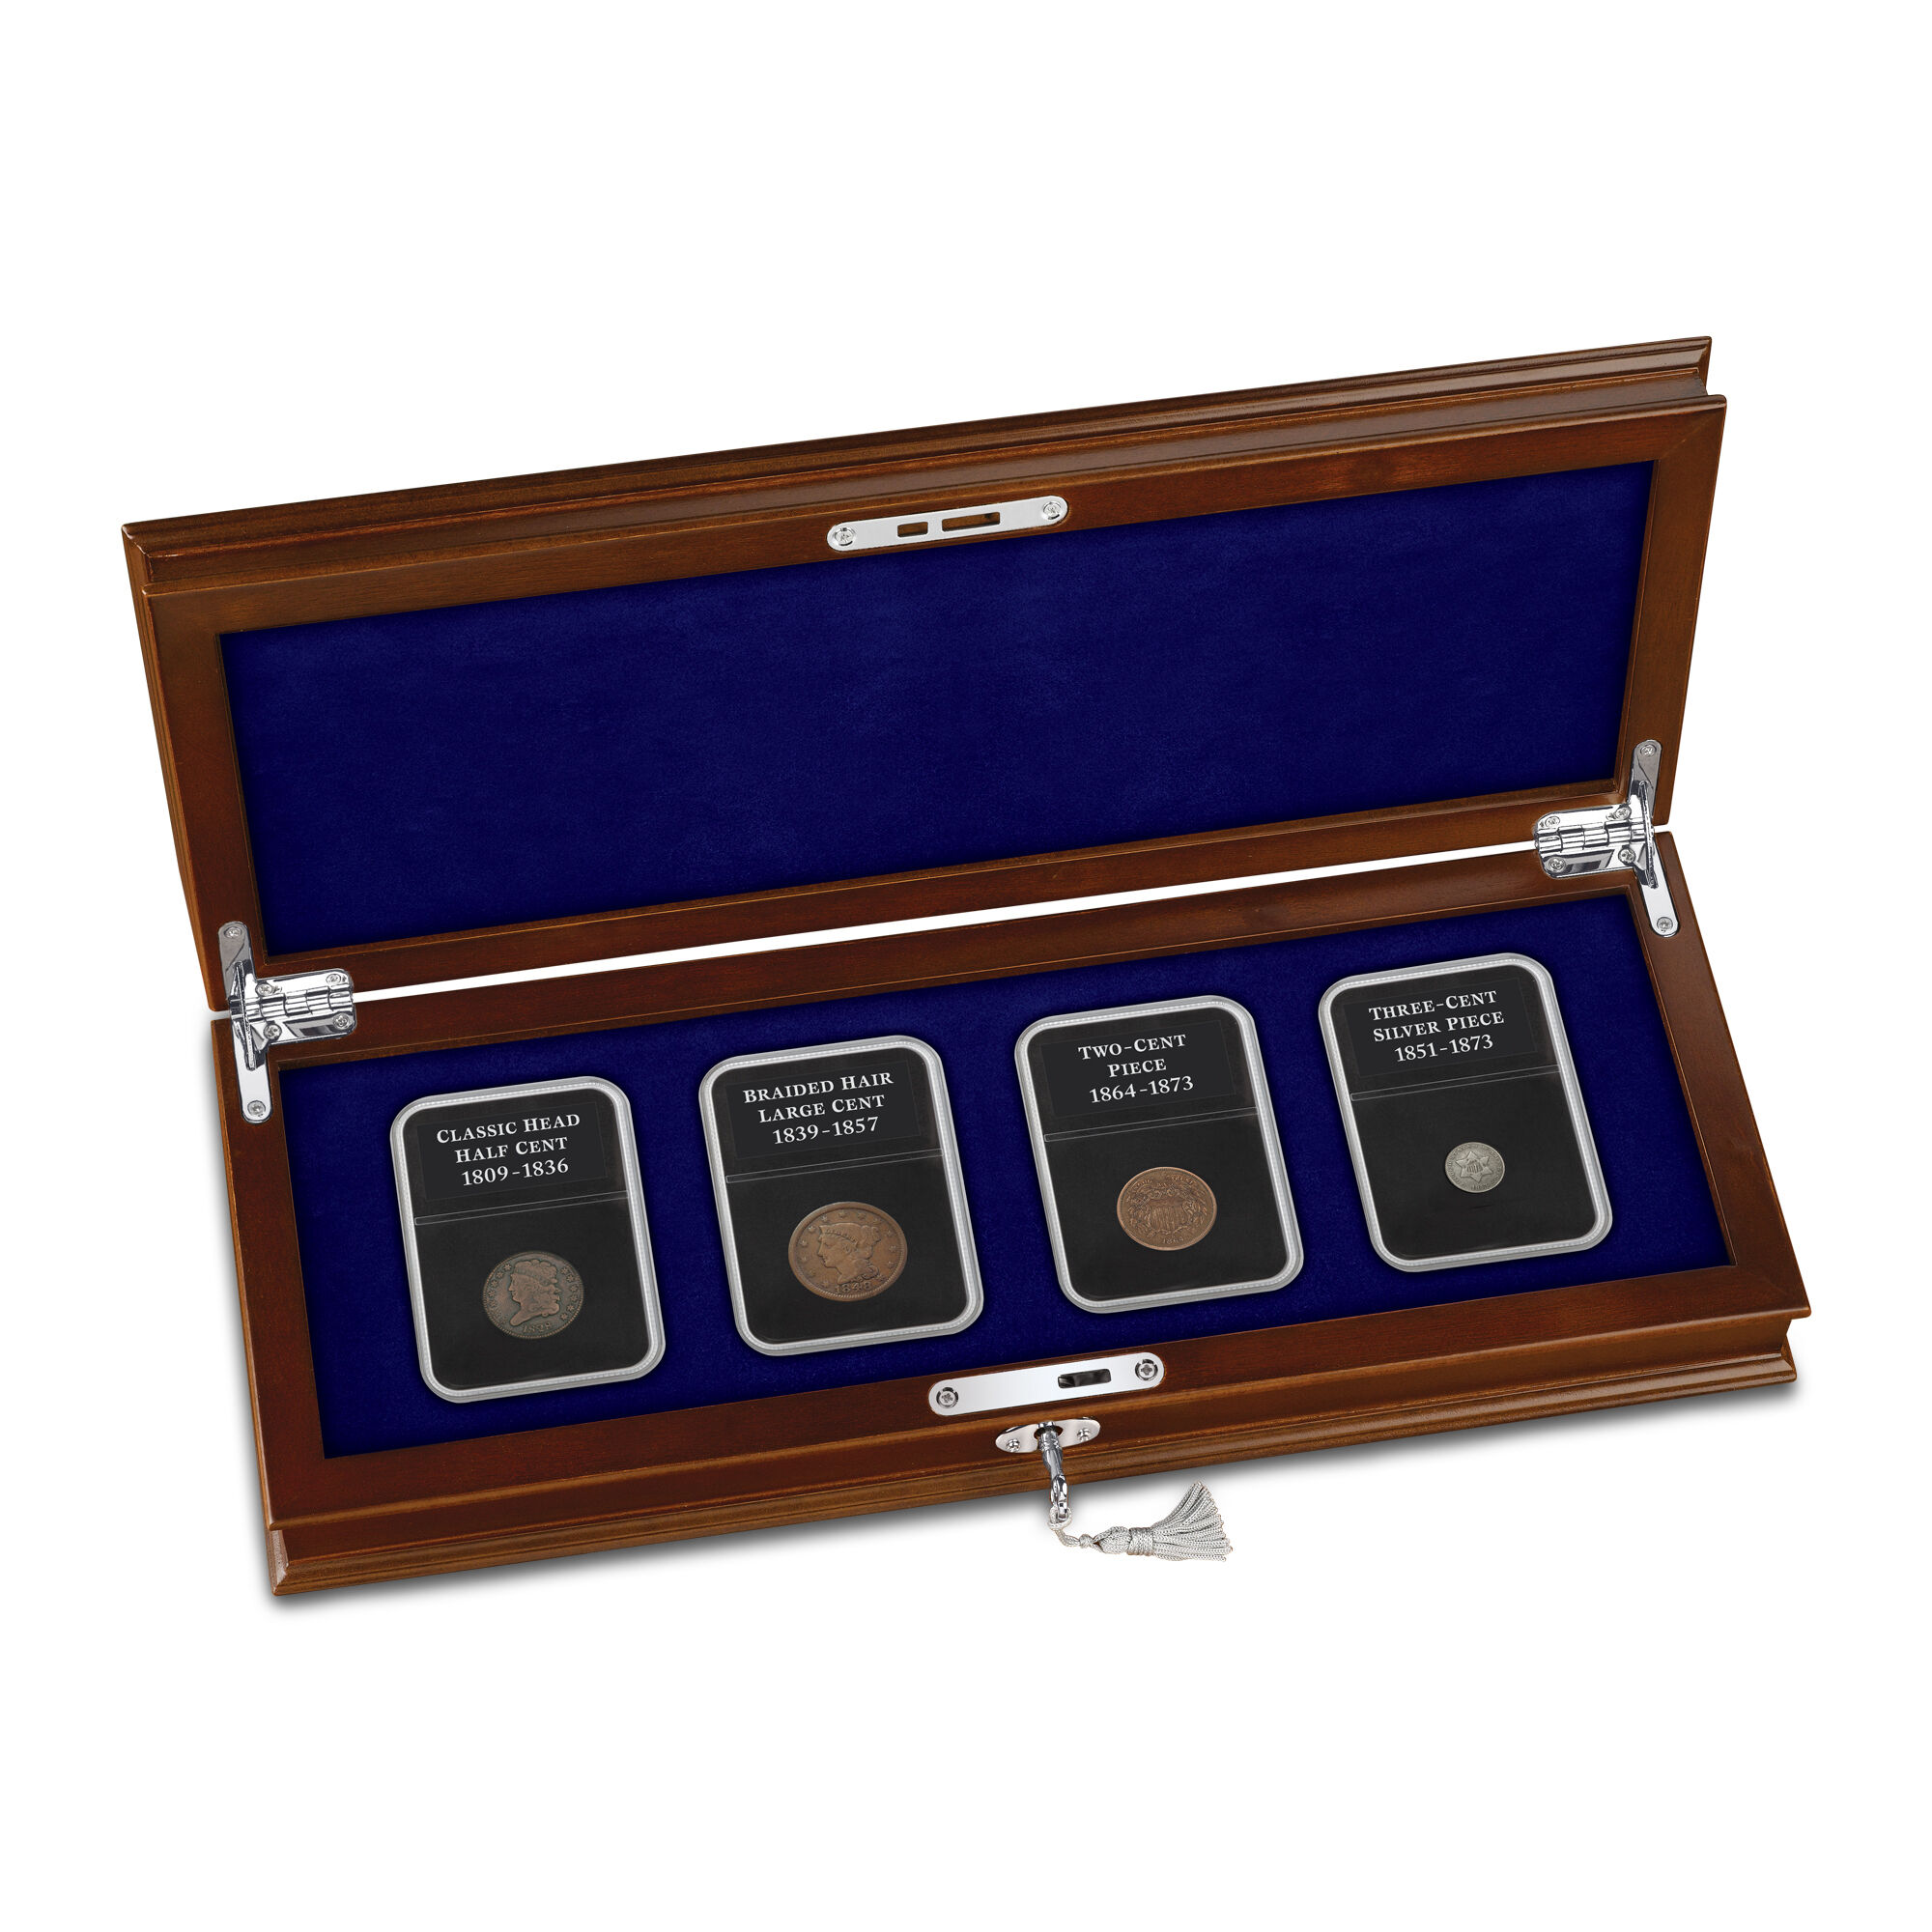 The Rare Cent Coin Collection 5218 0072 a display